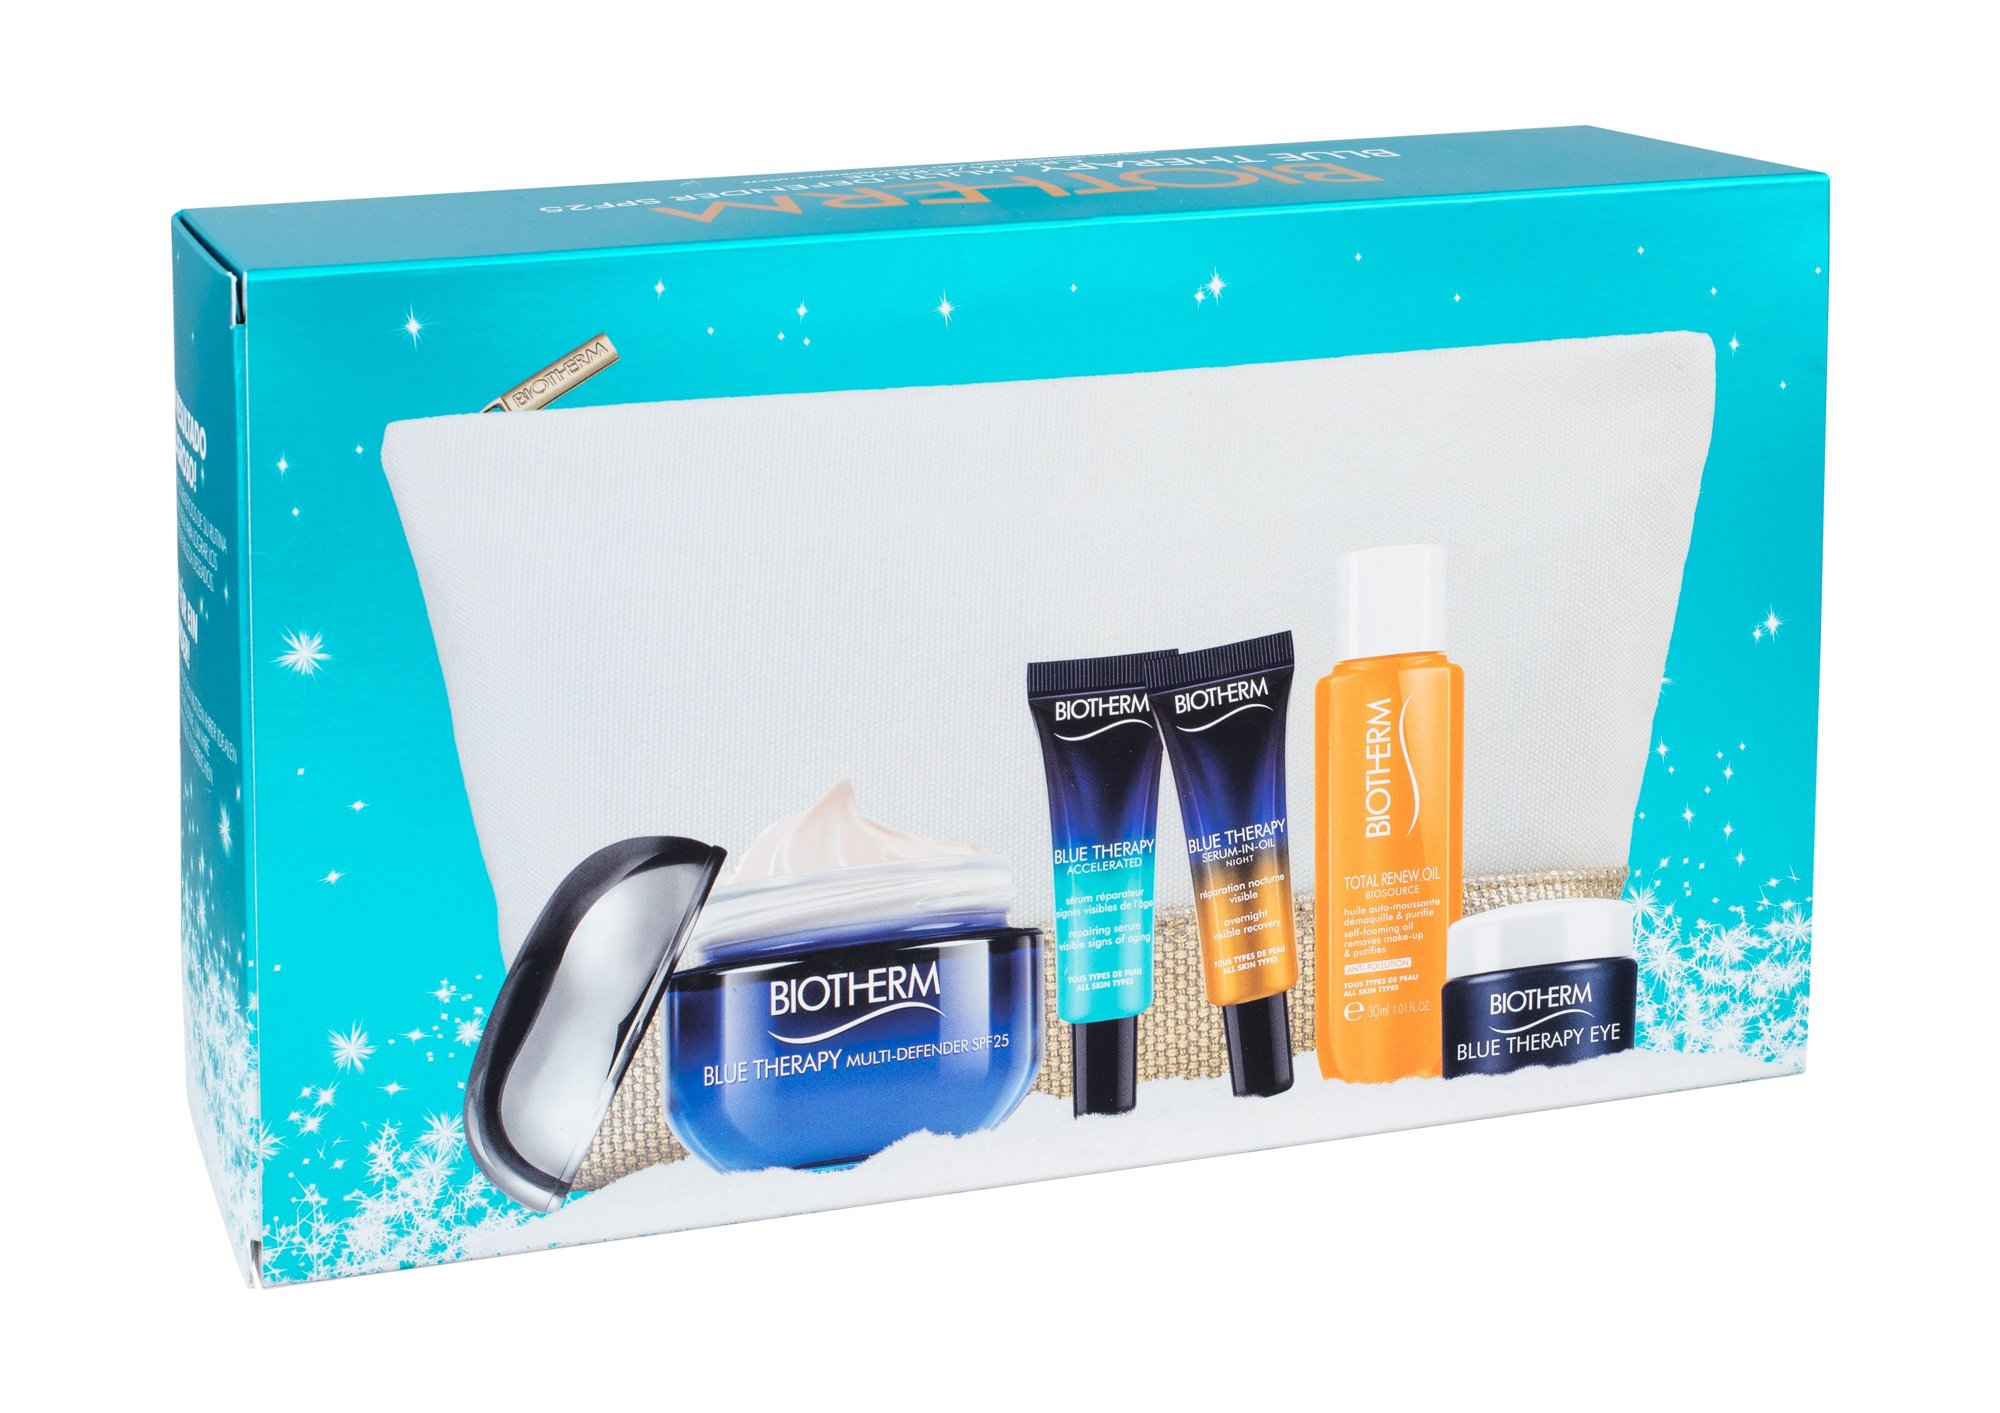 Biotherm Blue Therapy Multi-Defender SPF25 Kit